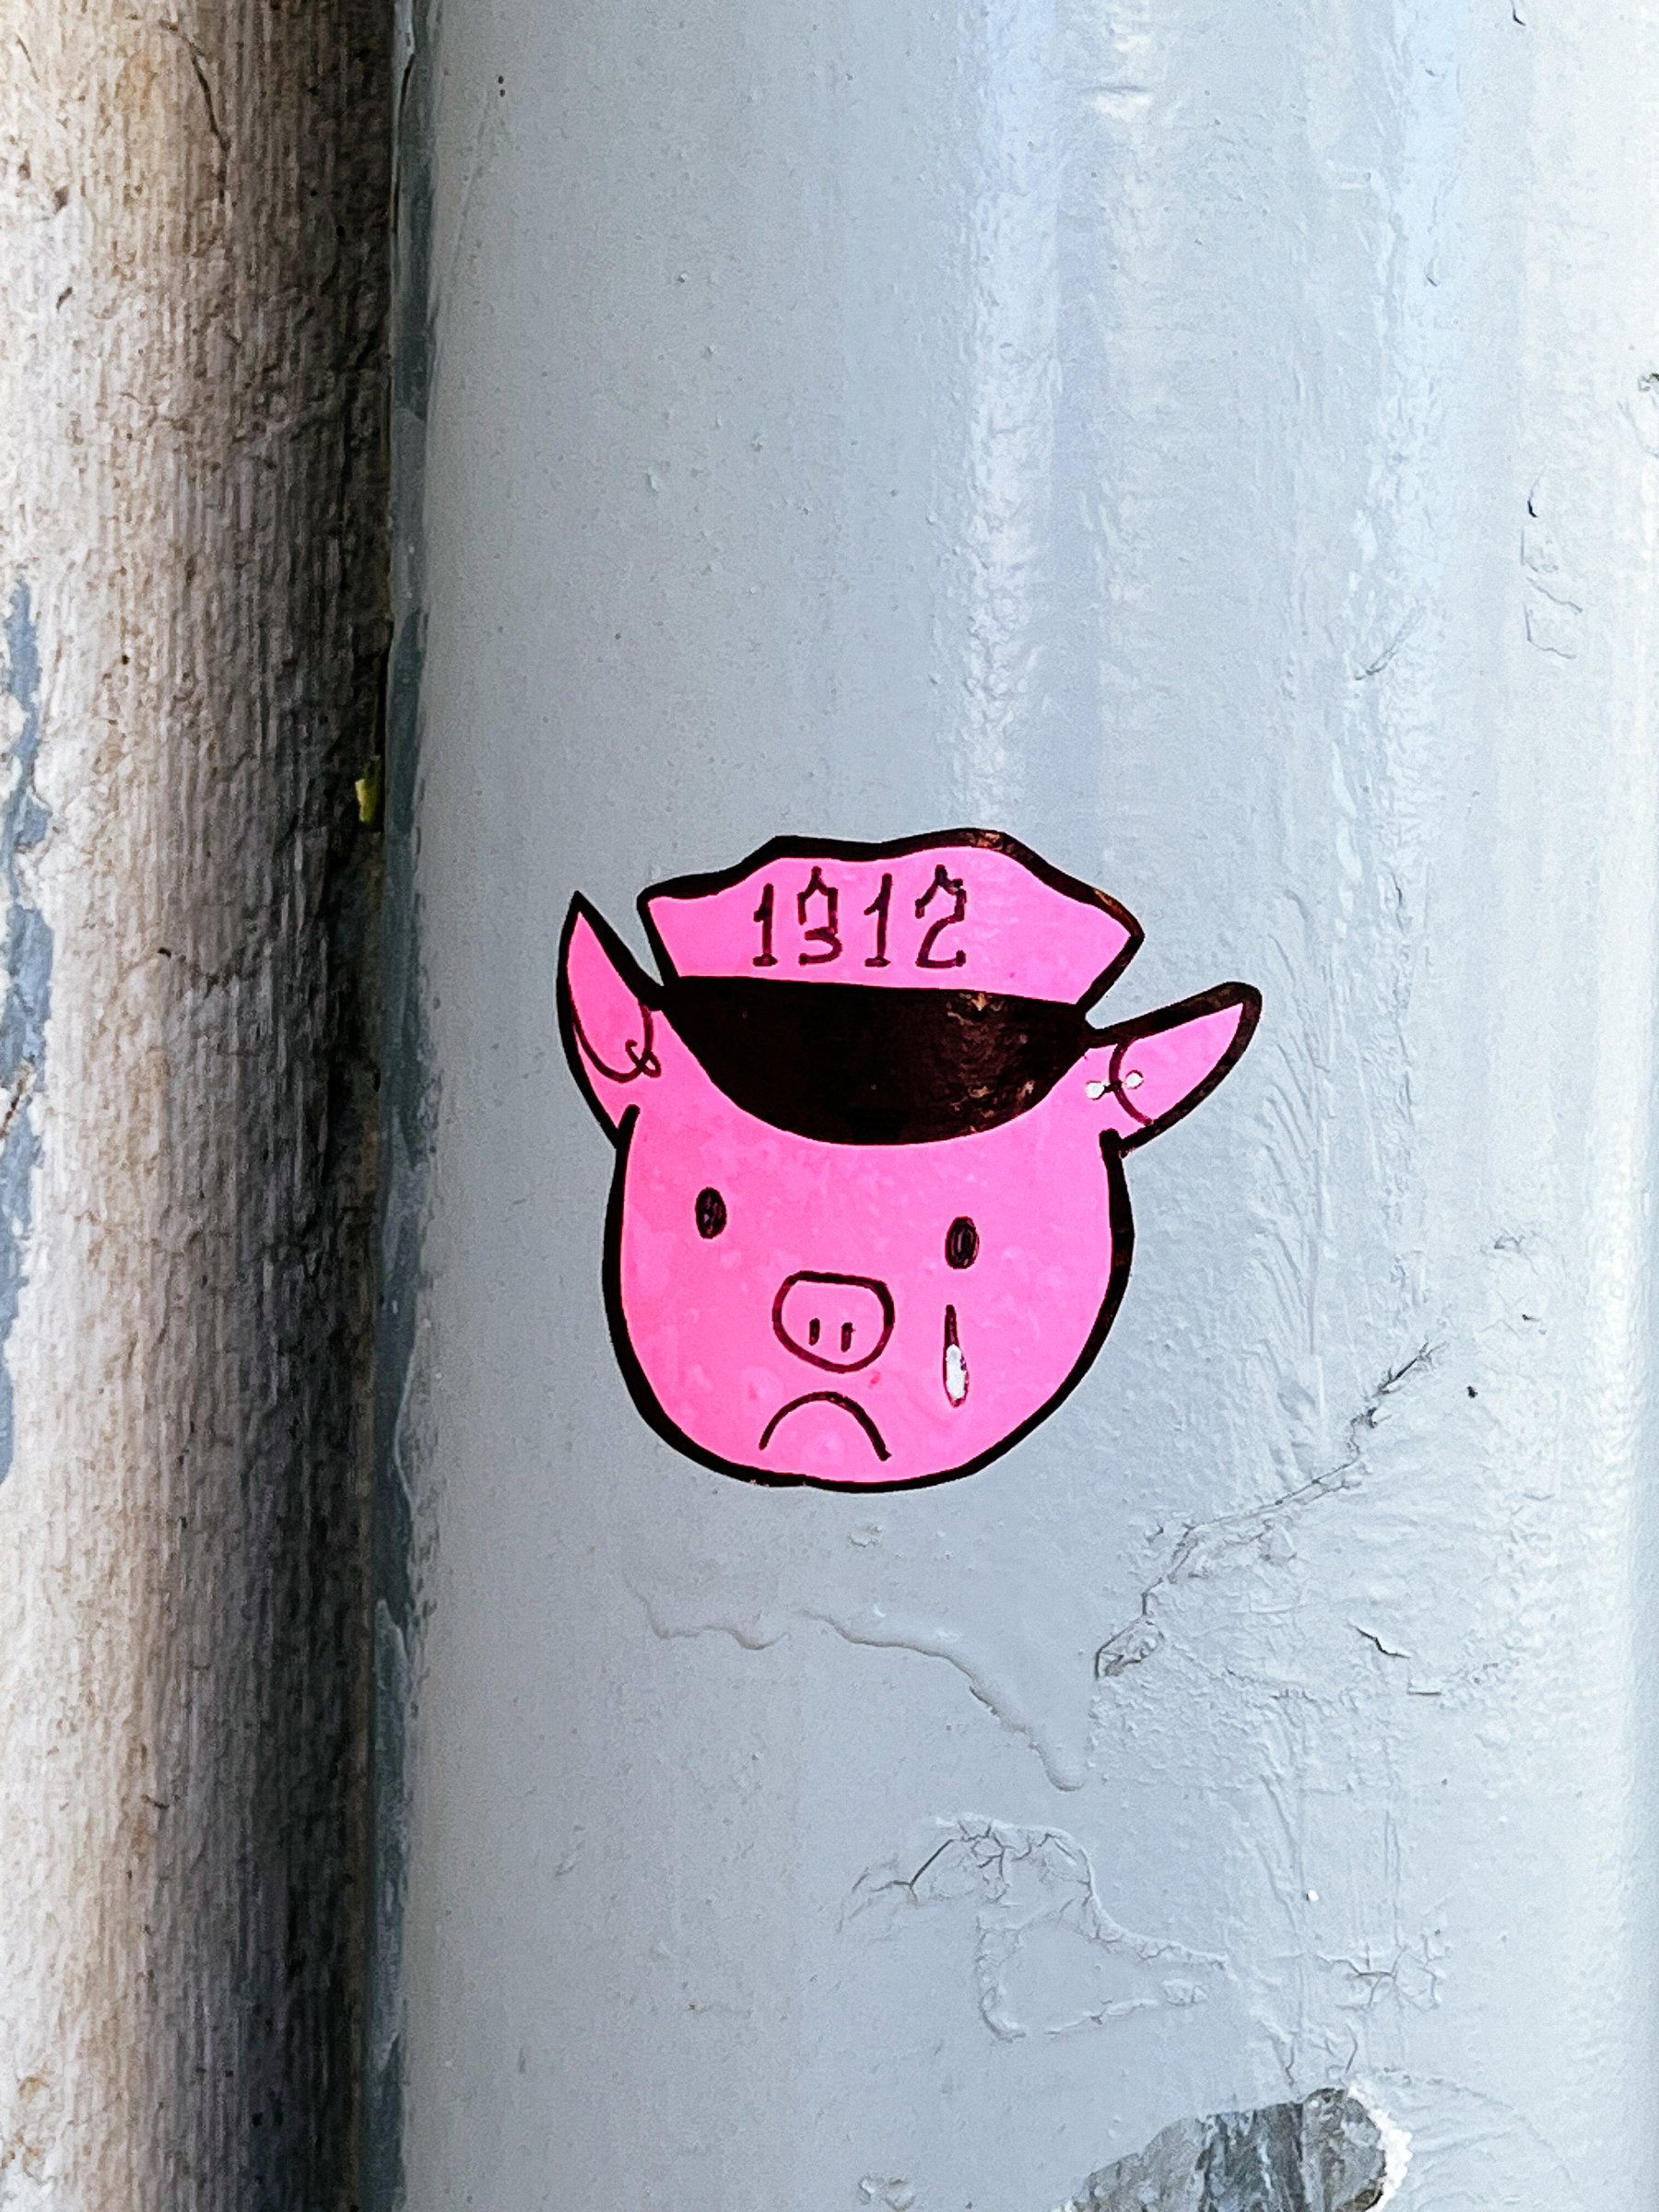 A very pink crying pig. 1312 on his cap. 